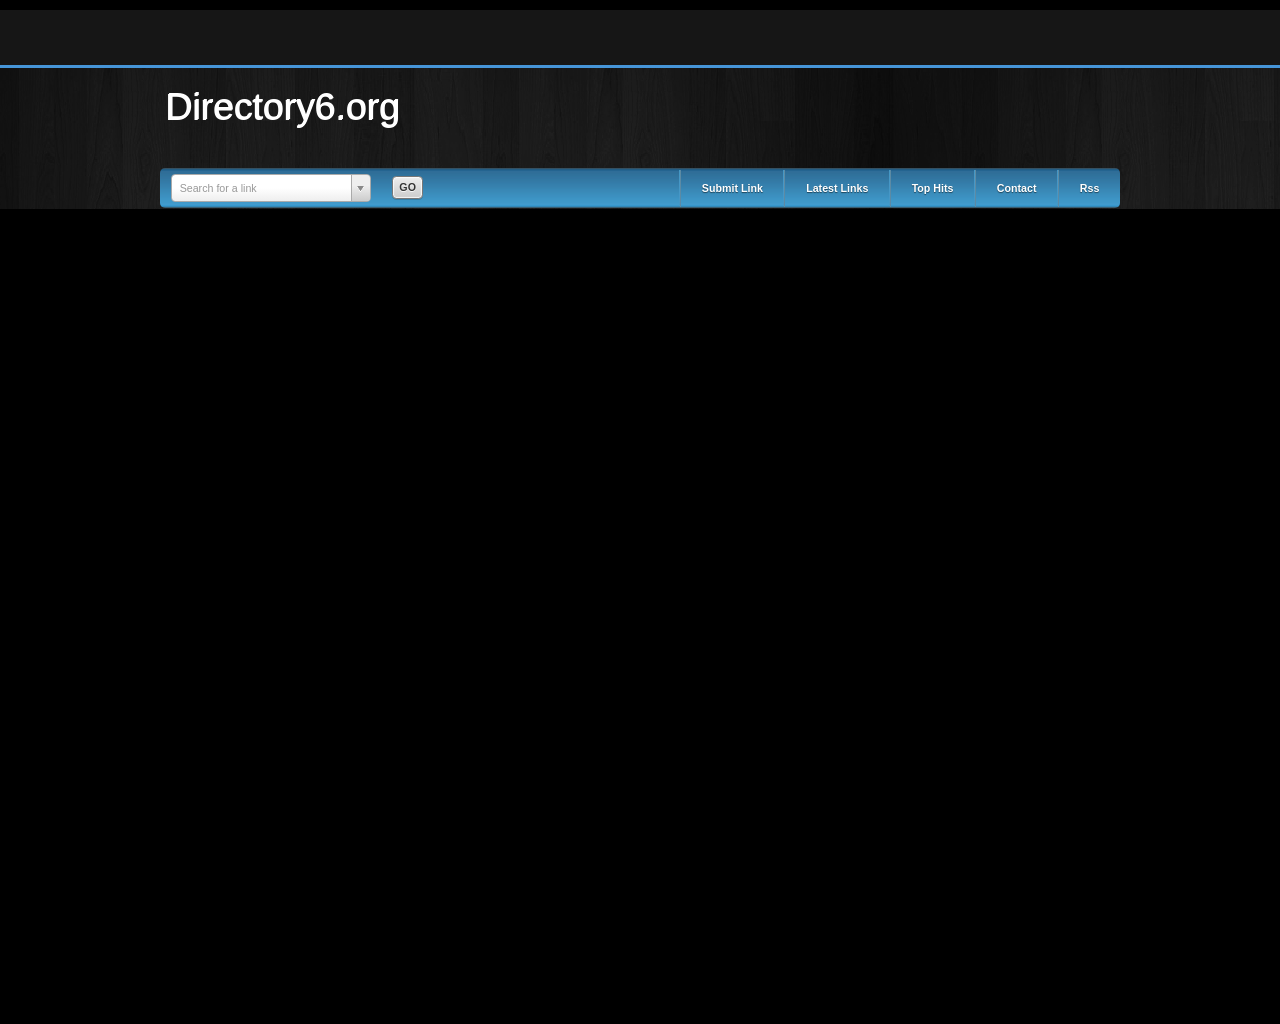 directory6.org